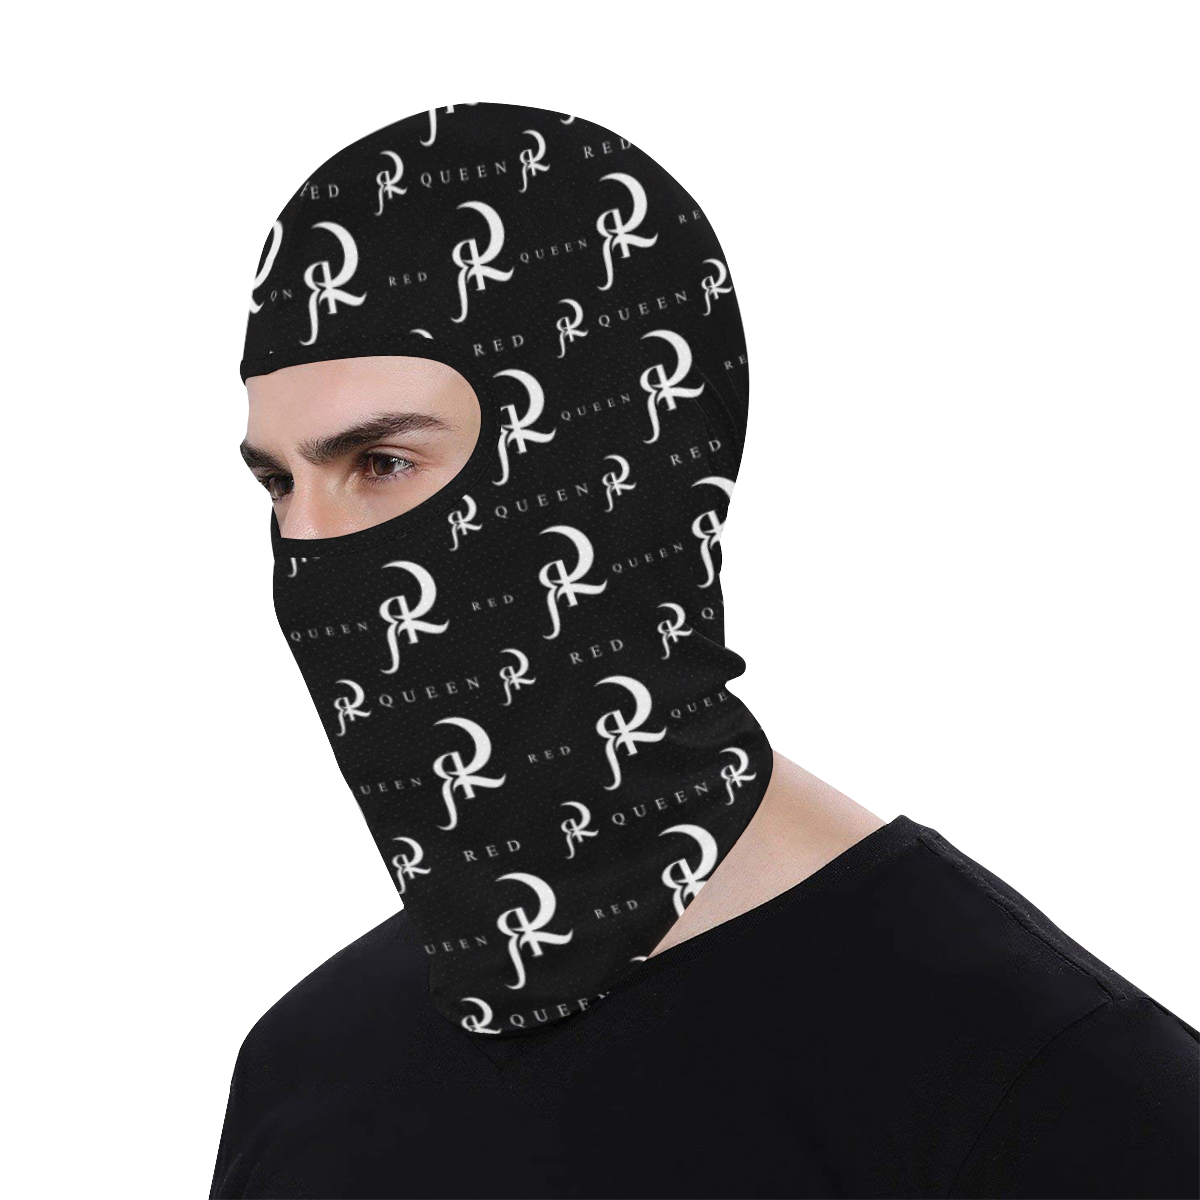 Red Queen Pattern Logo White & Black All Over Print Balaclava